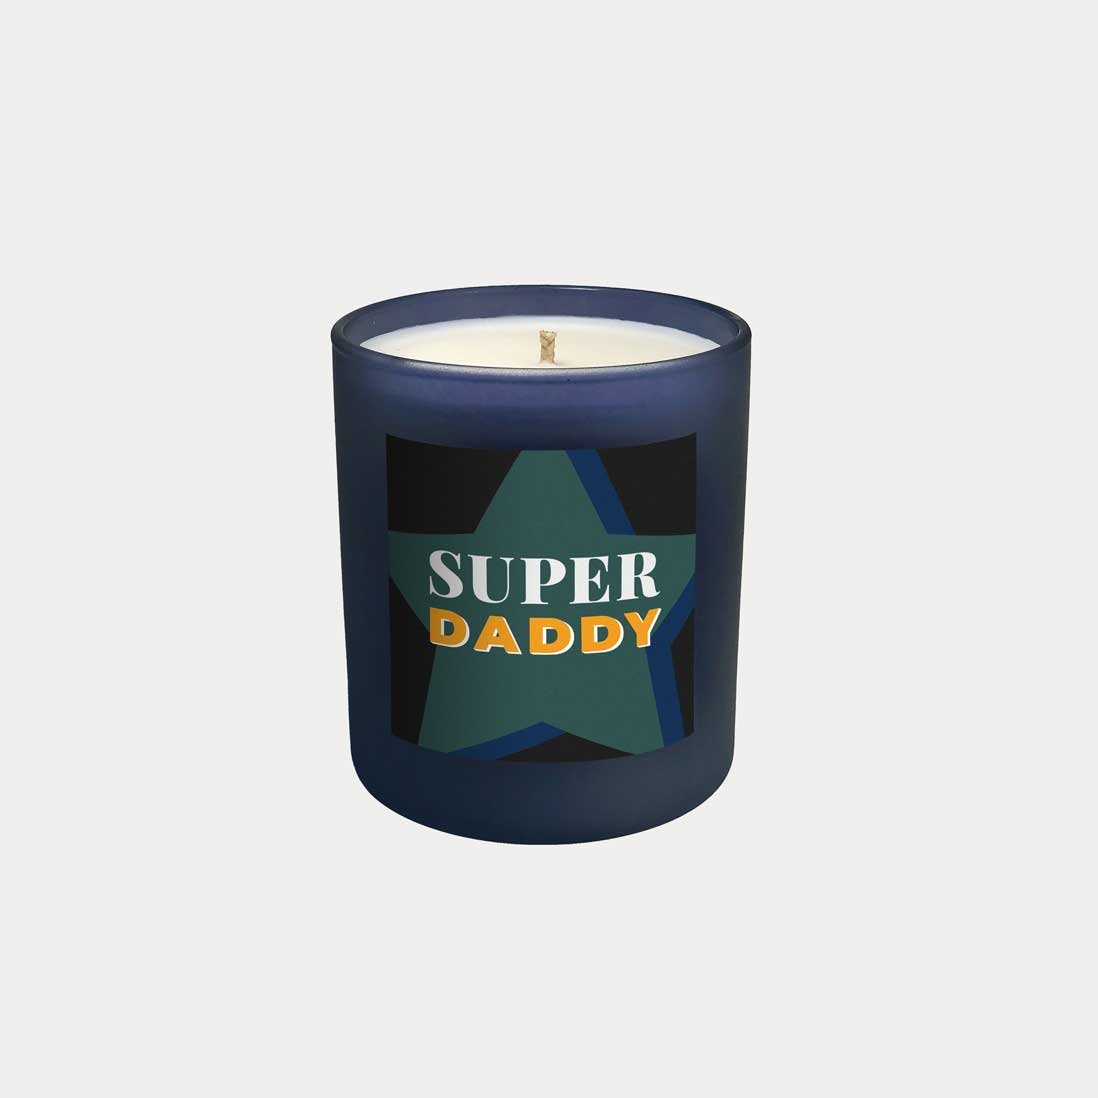 SUPER DADDY candle Father's Day gift for Dad